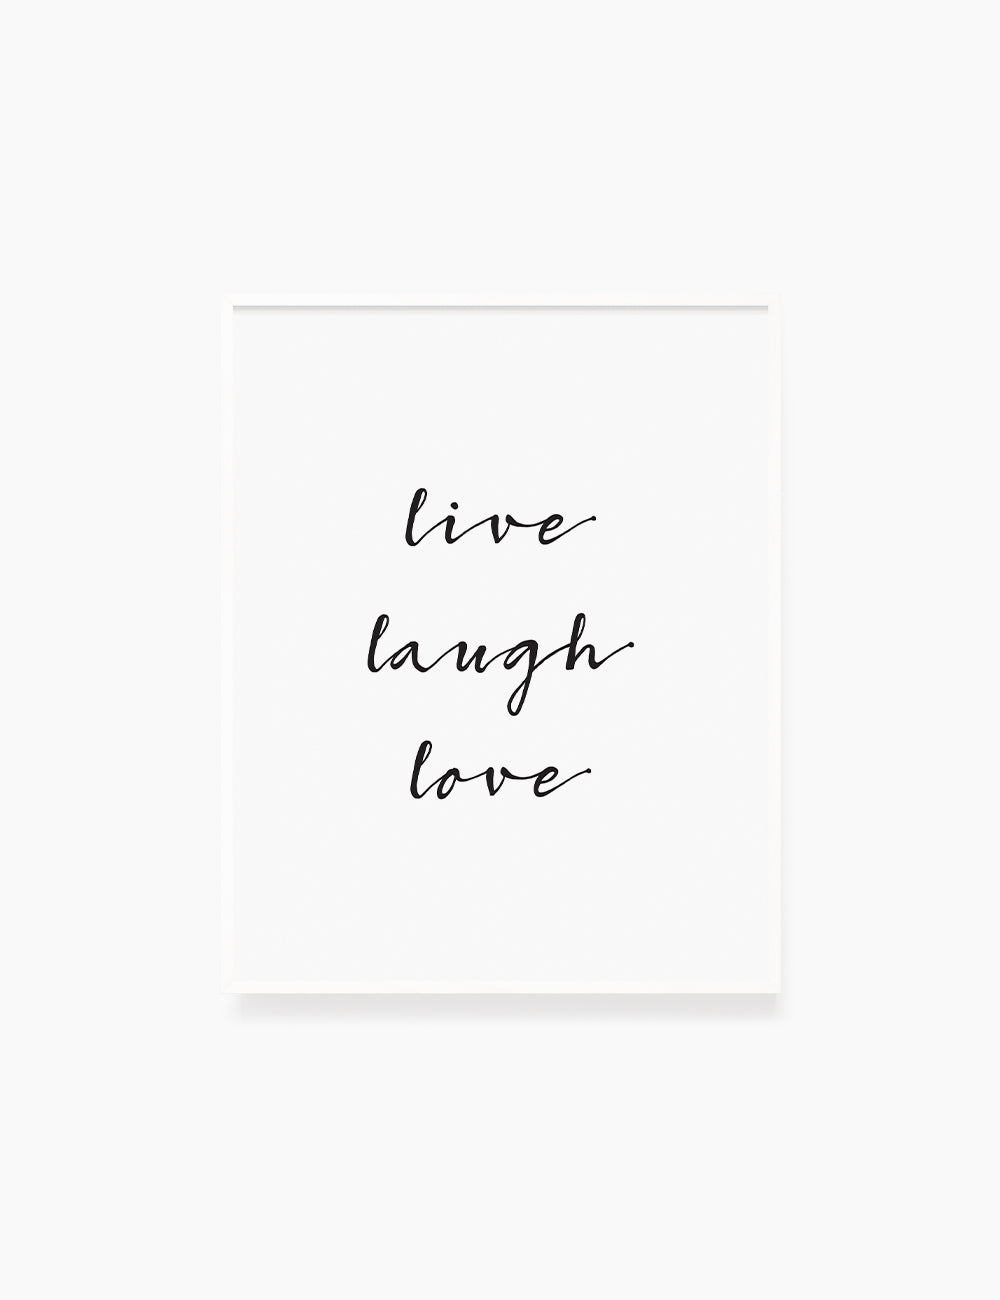 Printable Wall Art Quote: LIVE. LAUGH. LOVE. Printable Poster. Inspirational Quote. Motivational Quote. WA032 - Paper Moon Art & Design